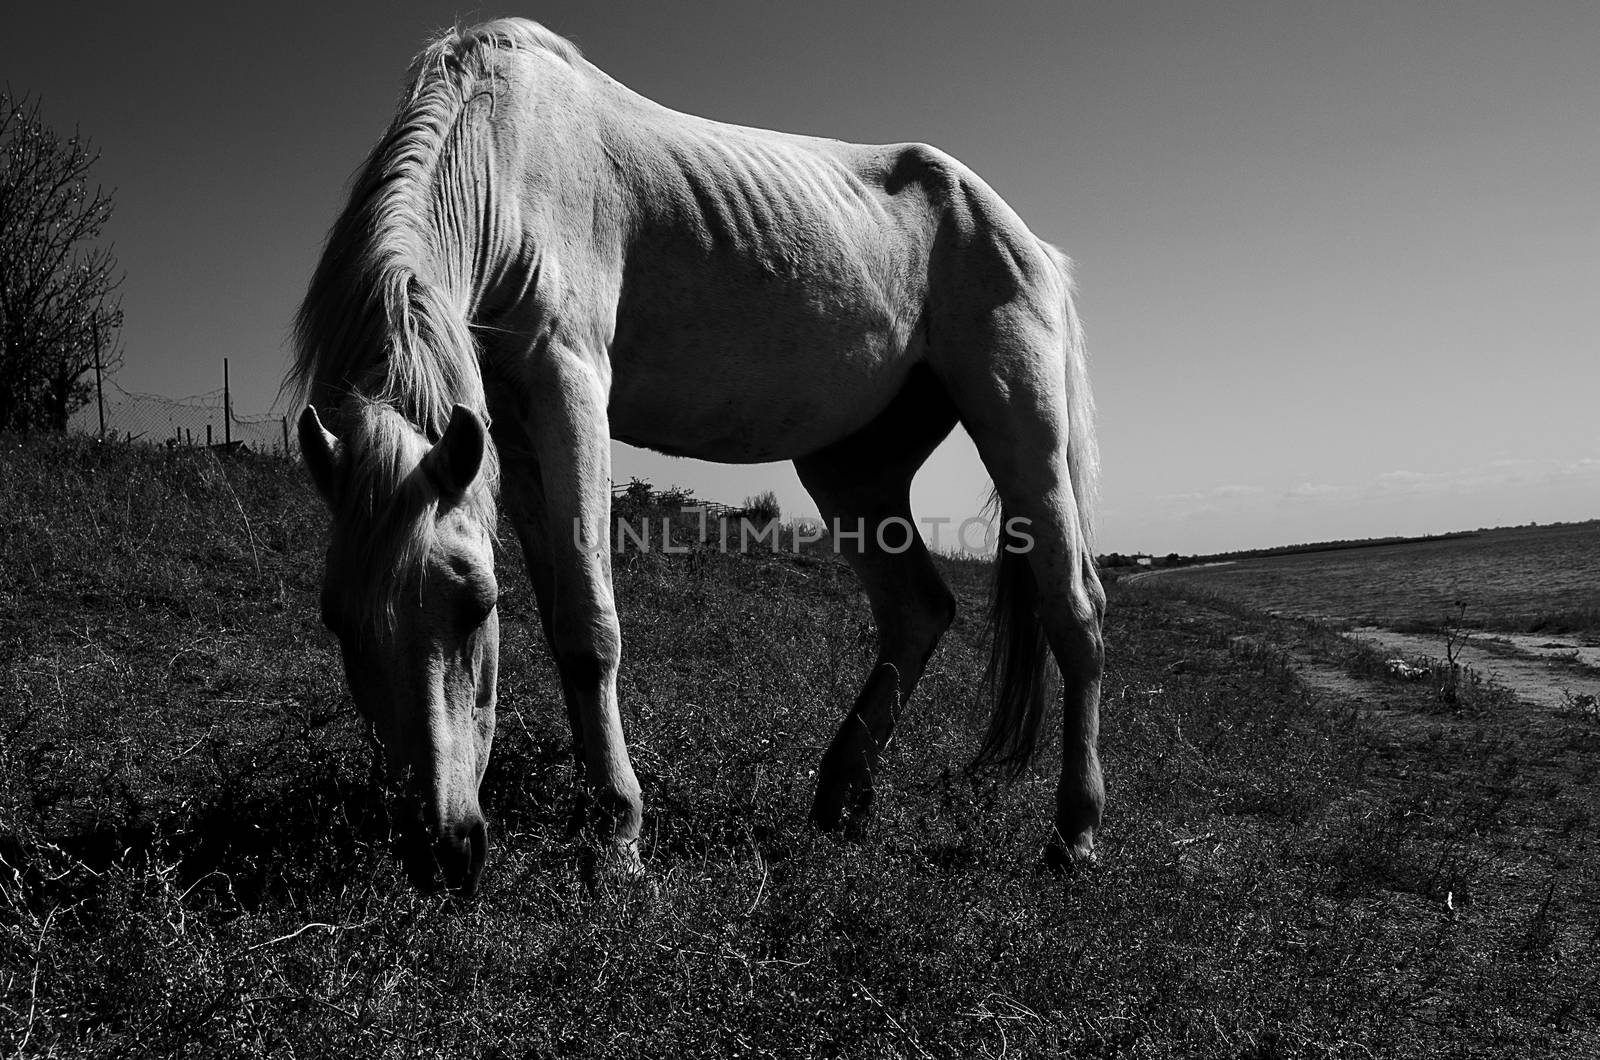 White horse grazing in a field near the river. Black and white photo. Horizontal